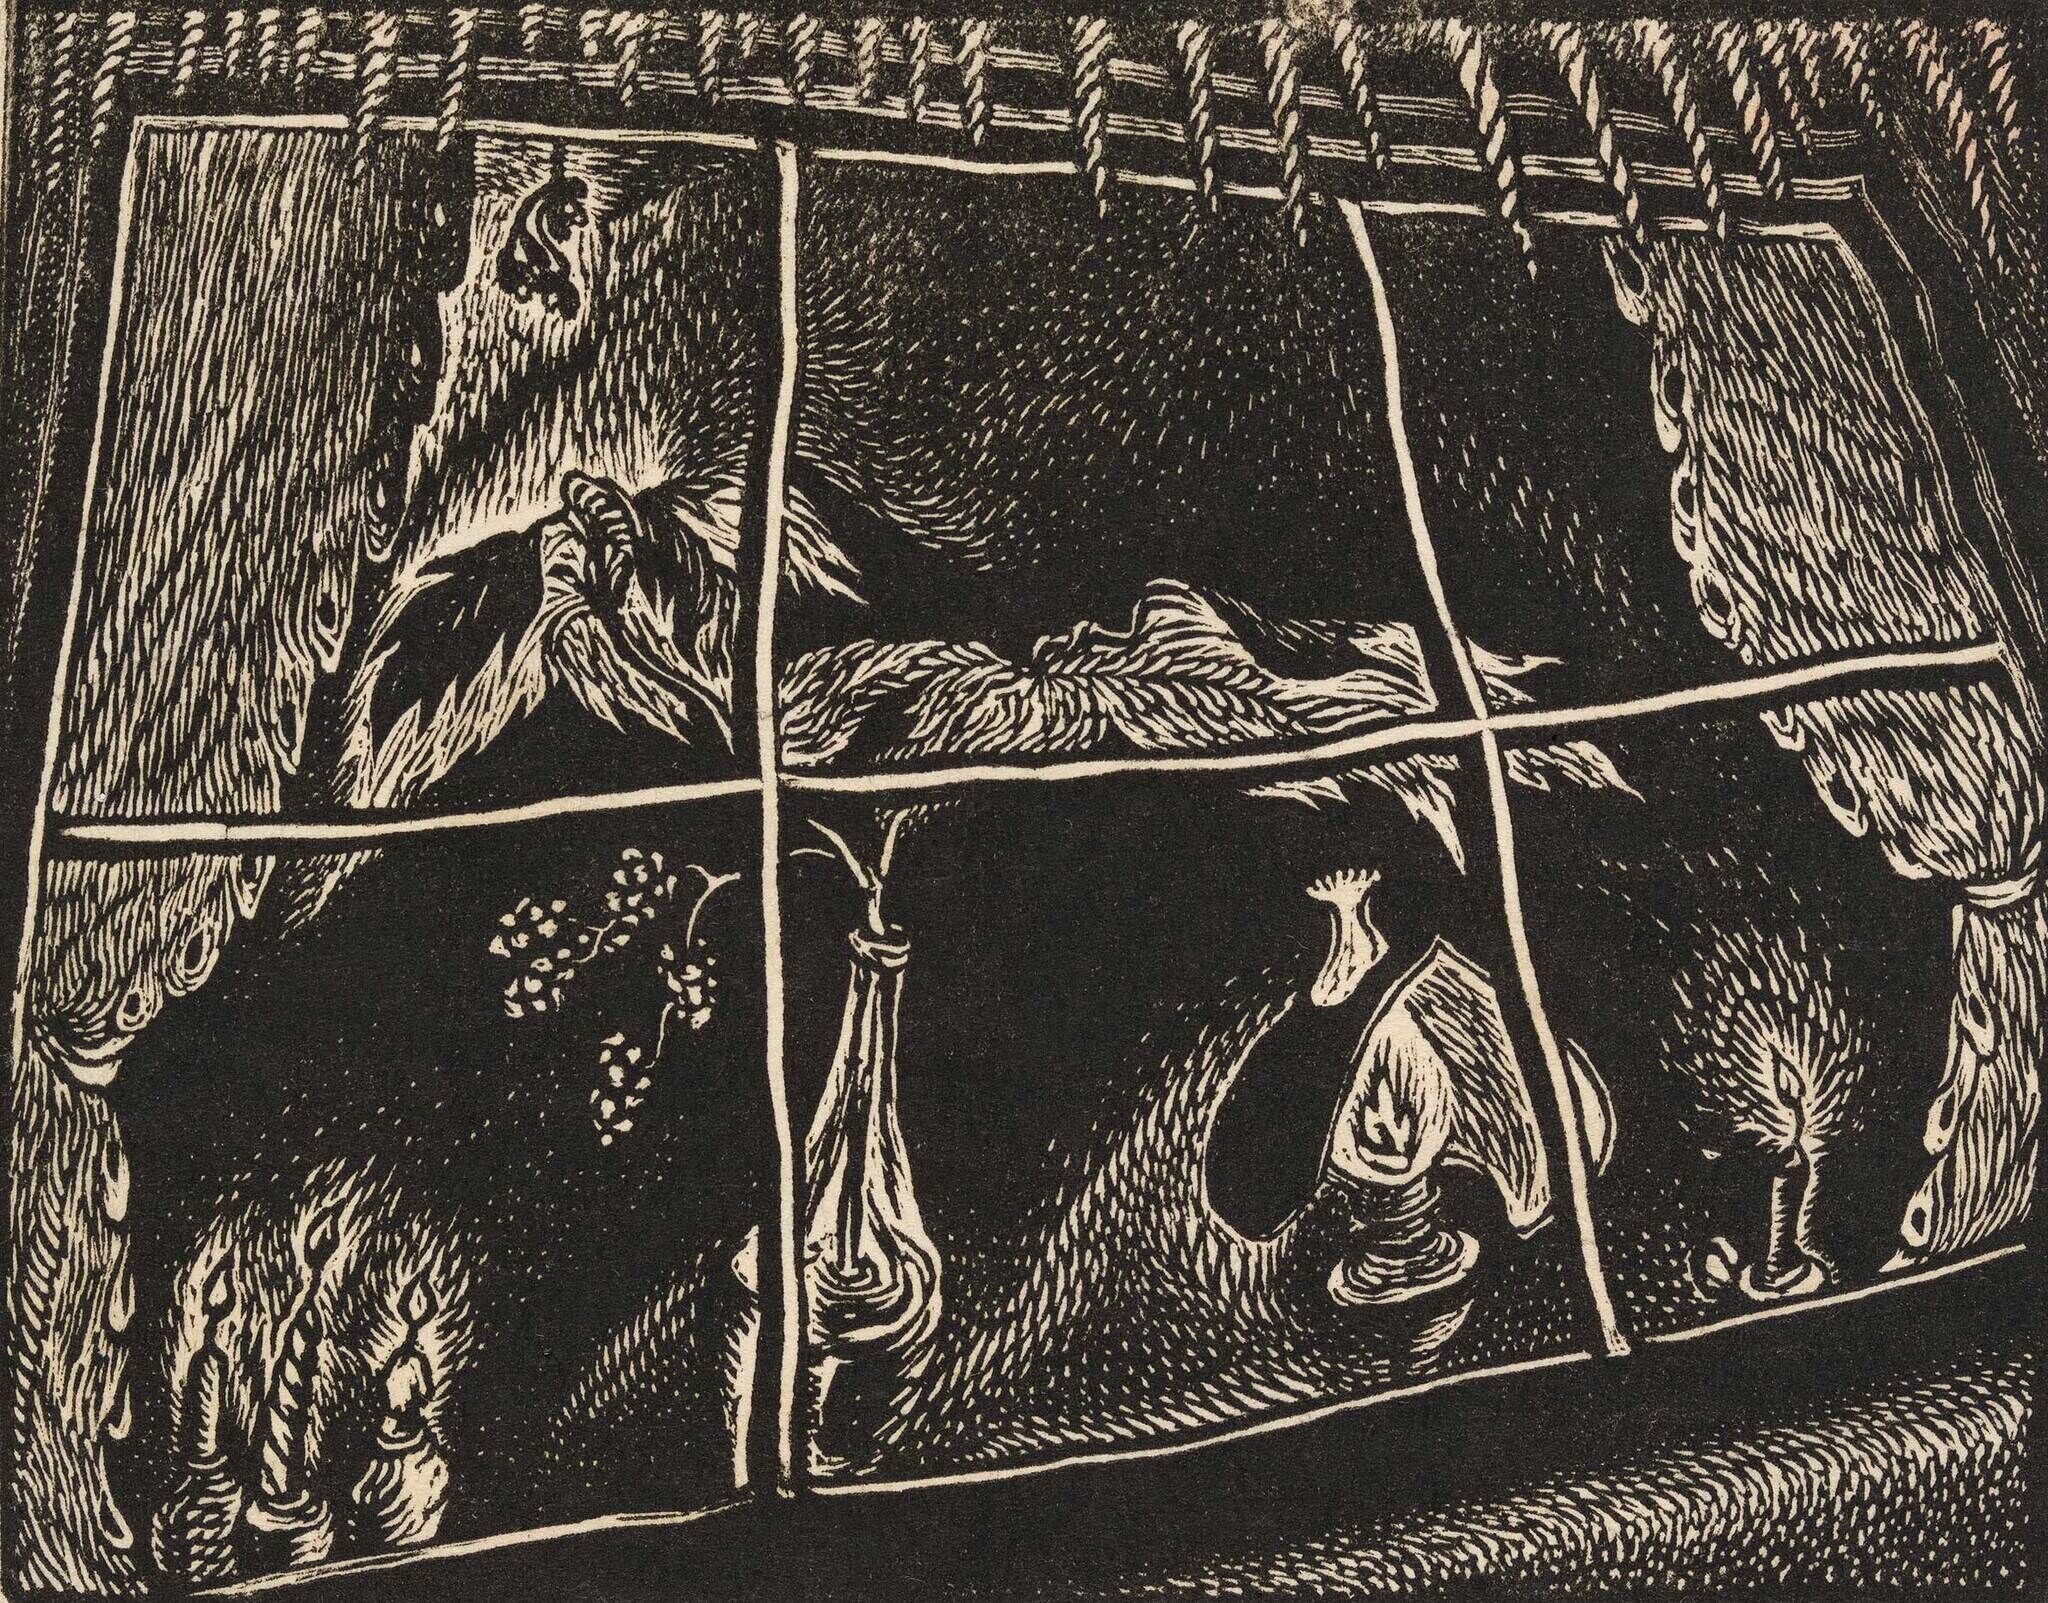 Woodcut-style illustration of a window with a view of a stormy night, an oil lamp, and billowing curtains.